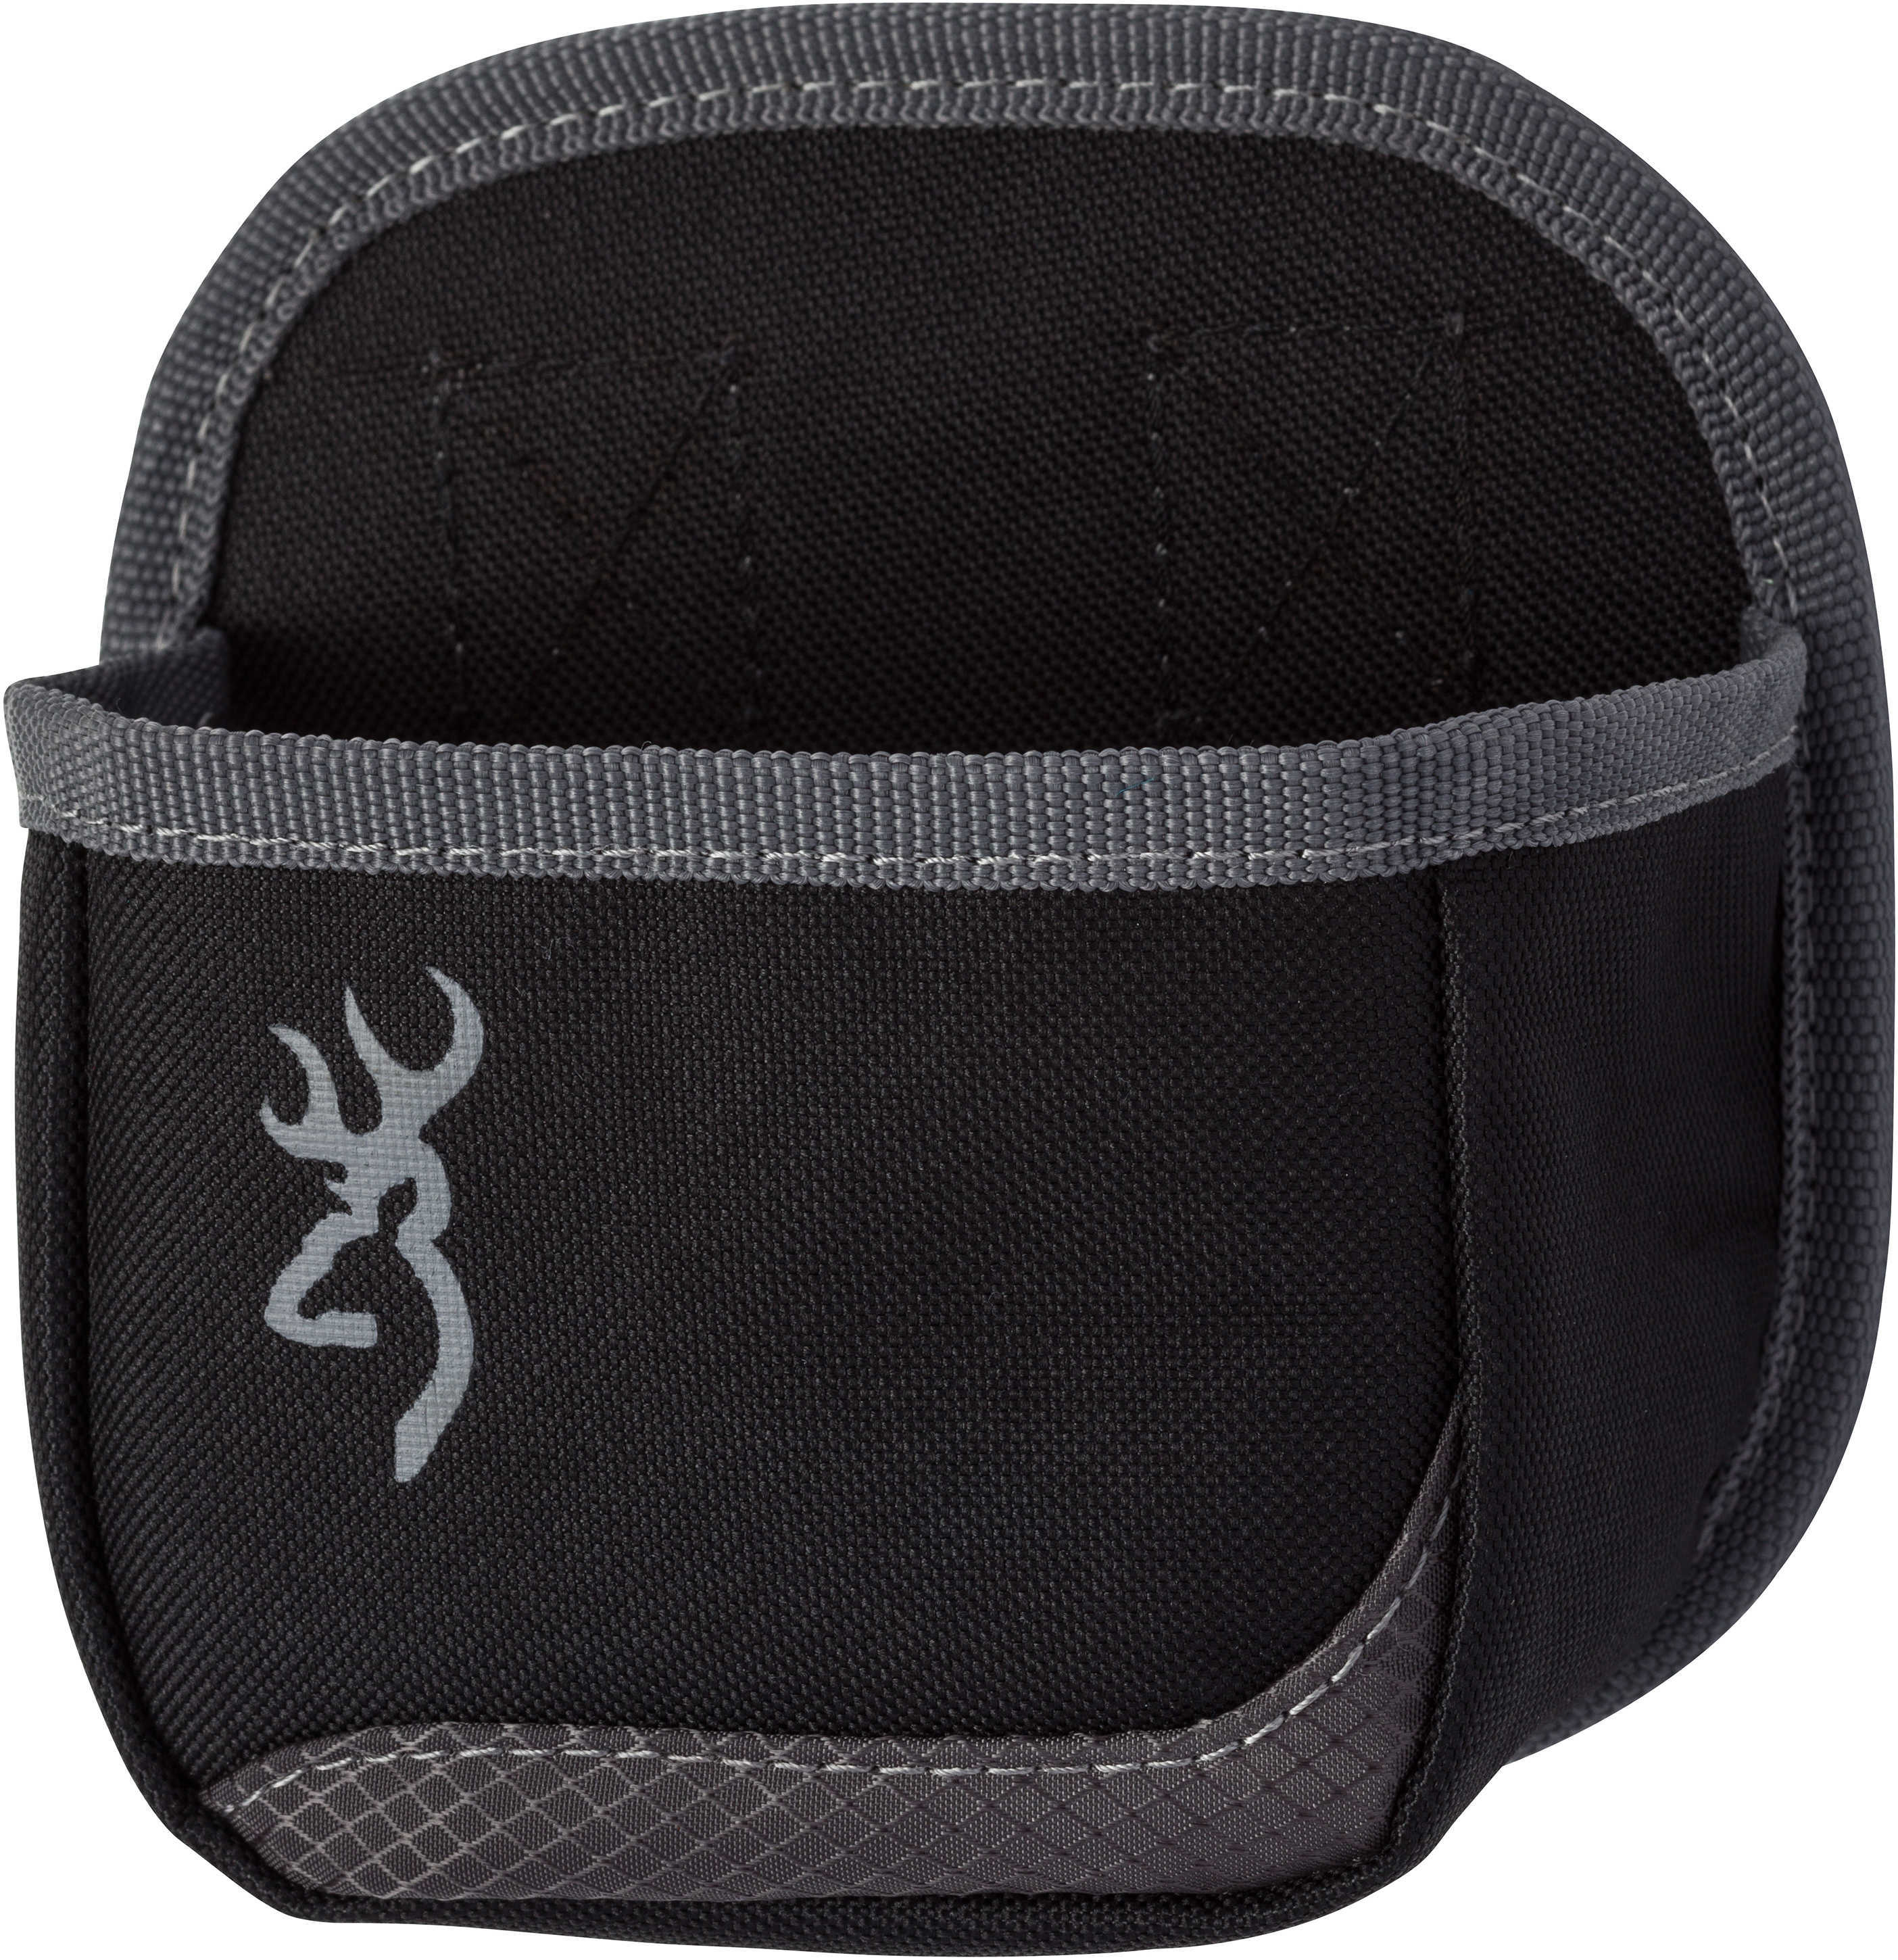 Browning Flash Shell Box Carrier Black/Gray Md: 121062693-img-1